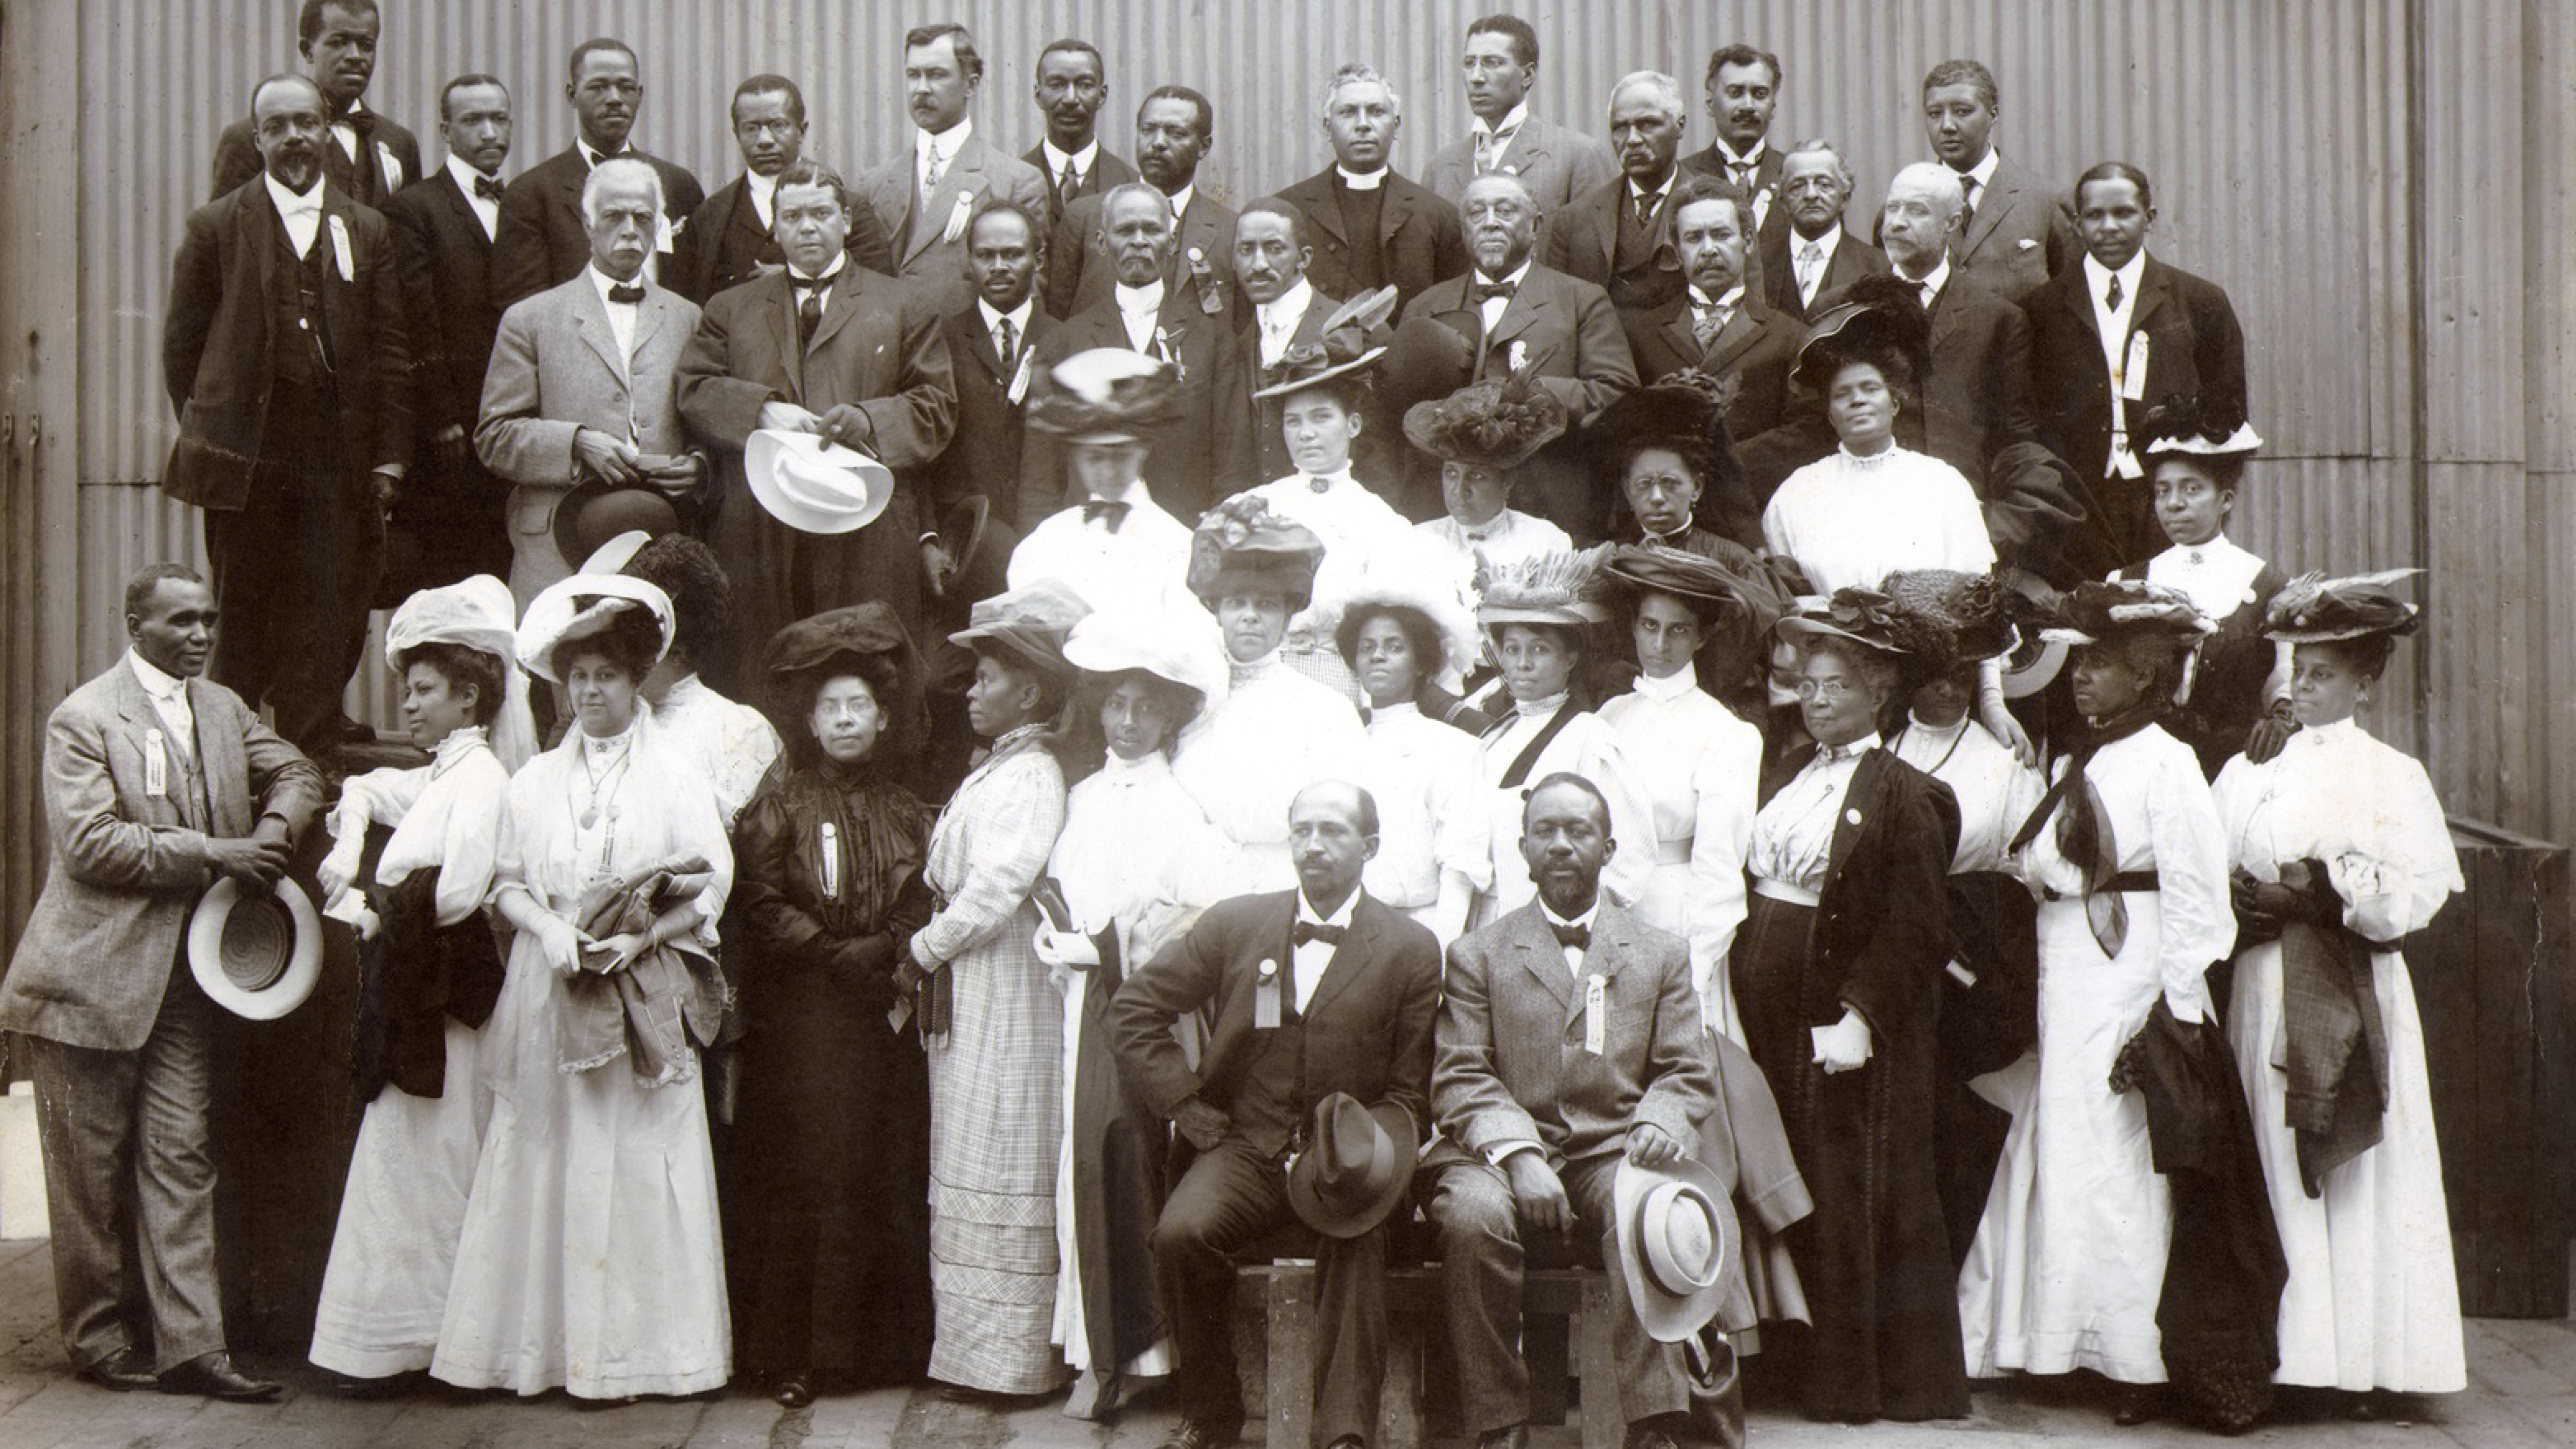 Niagara Movement delegates, Boston, Mass., 1907. W. E. B. Du Bois Papers, Robert S. Cox Special Collections and University Archives Research Center, UMass Amherst Libraries.